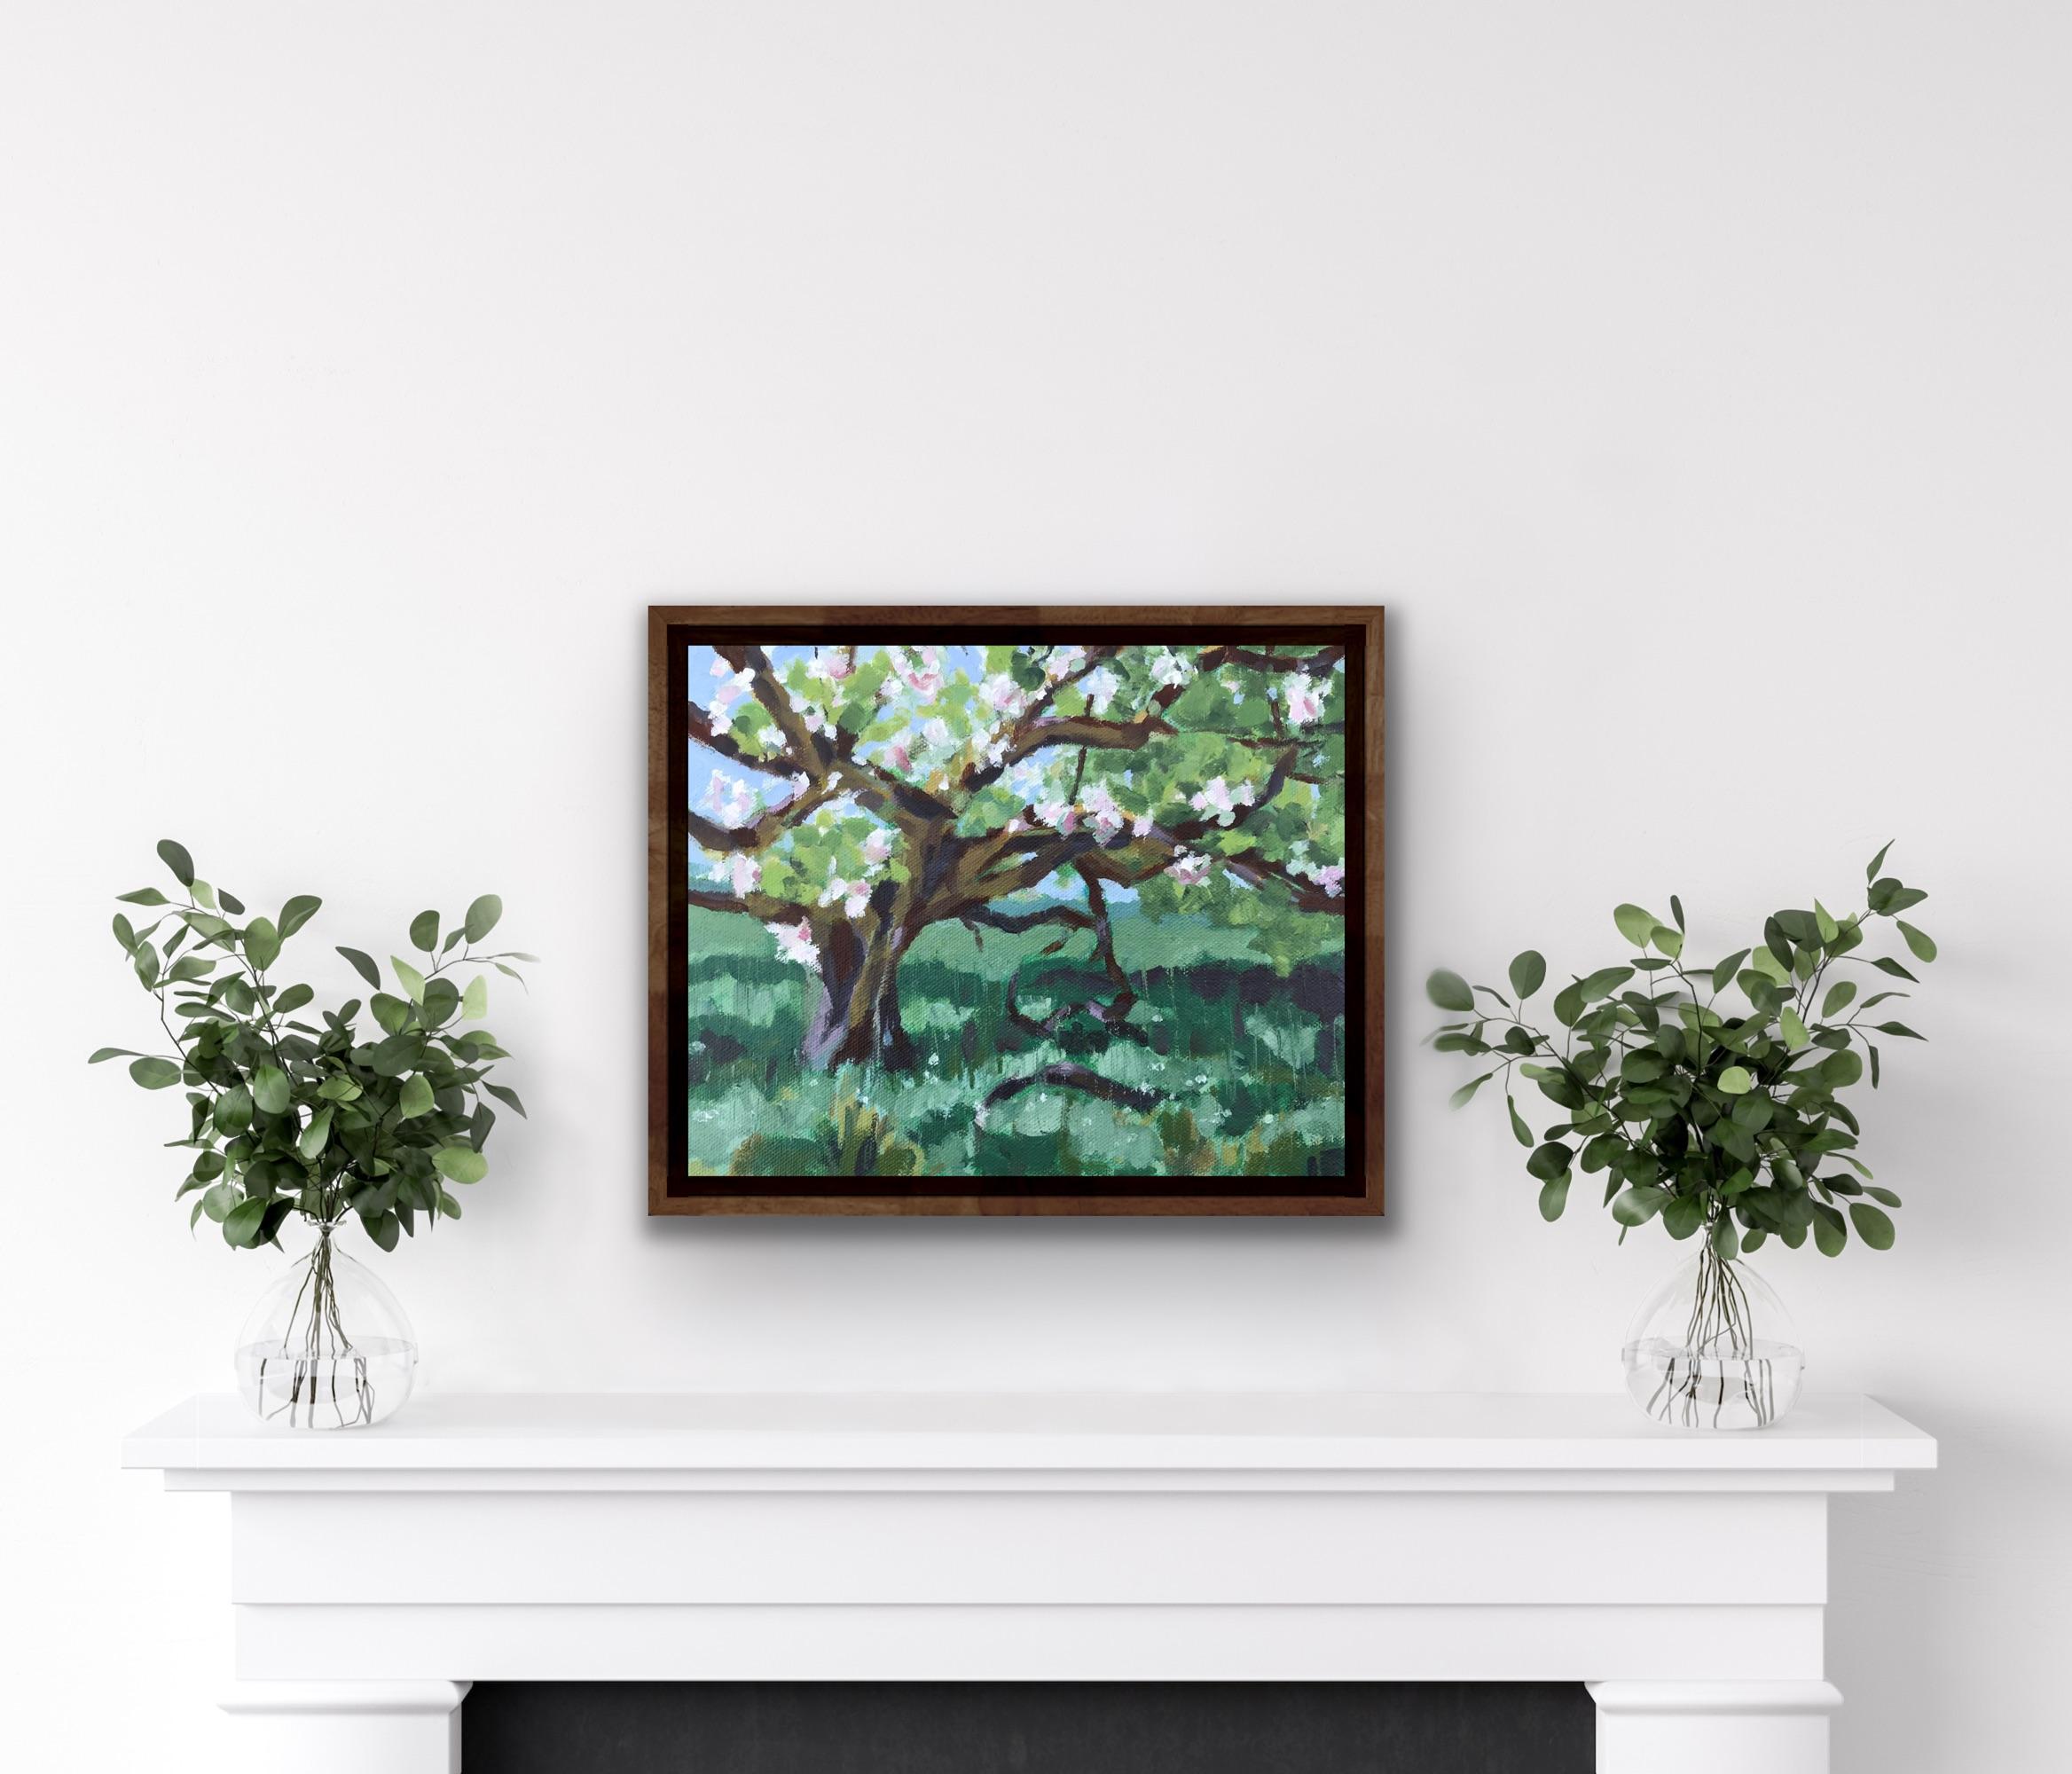 The Old Apple Tree by Margaret Crutchley [2022]
original and hand signed by the artist 
Acrylic on a deep canvas
Image size: H:20 cm x W:25 cm
Complete Size of Unframed Work: H:20 cm x W:25 cm x D:3.5cm
Sold Unframed
Please note that insitu images